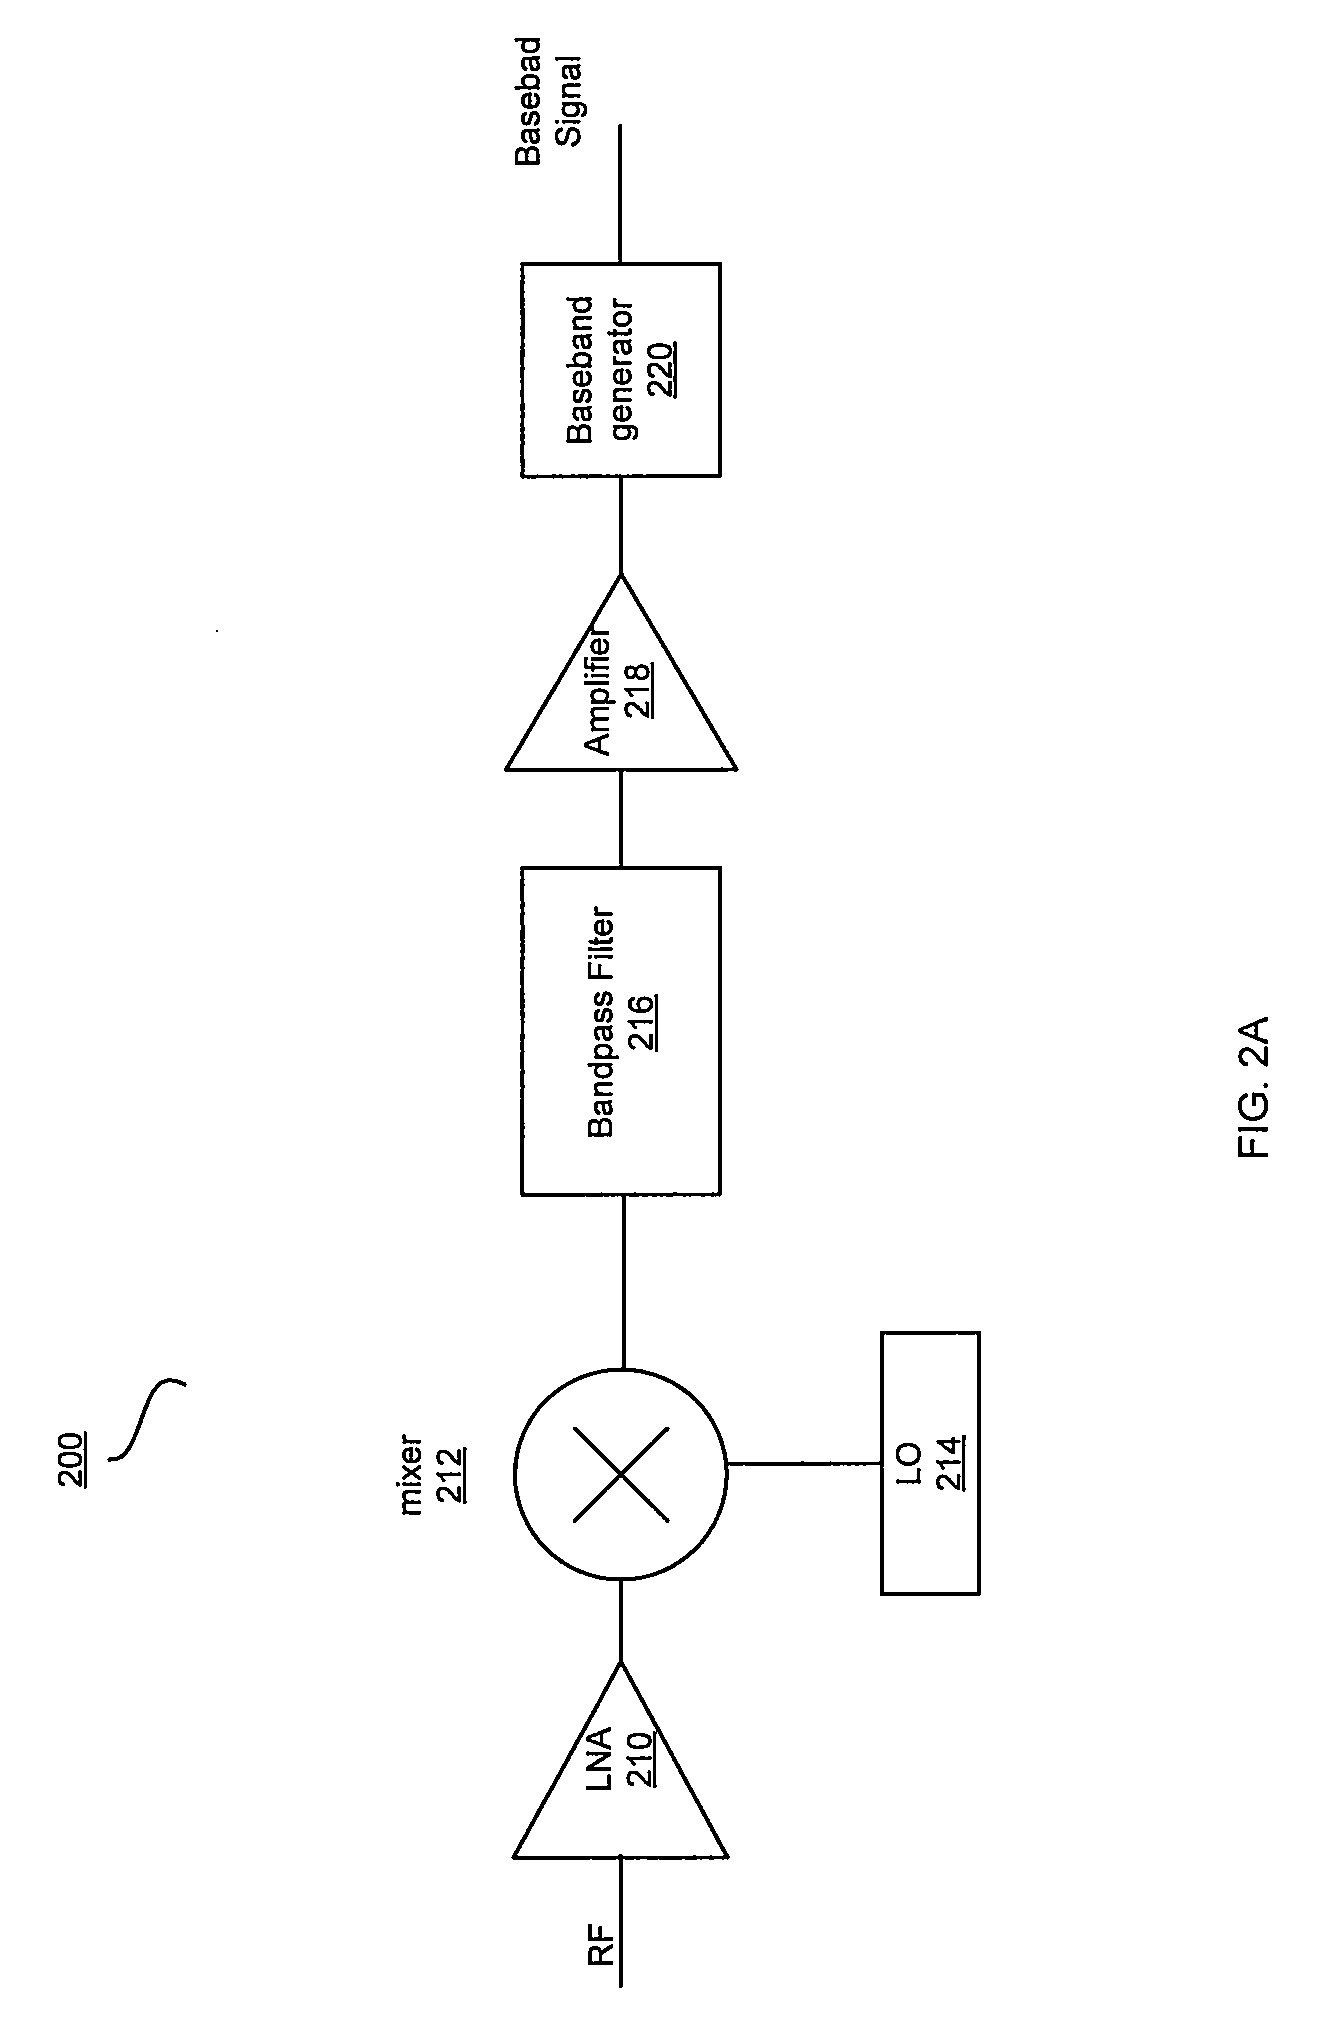 Method And System For A Programmable Local Oscillator Generator Utilizing A DDFS For Extremely High Frequencies